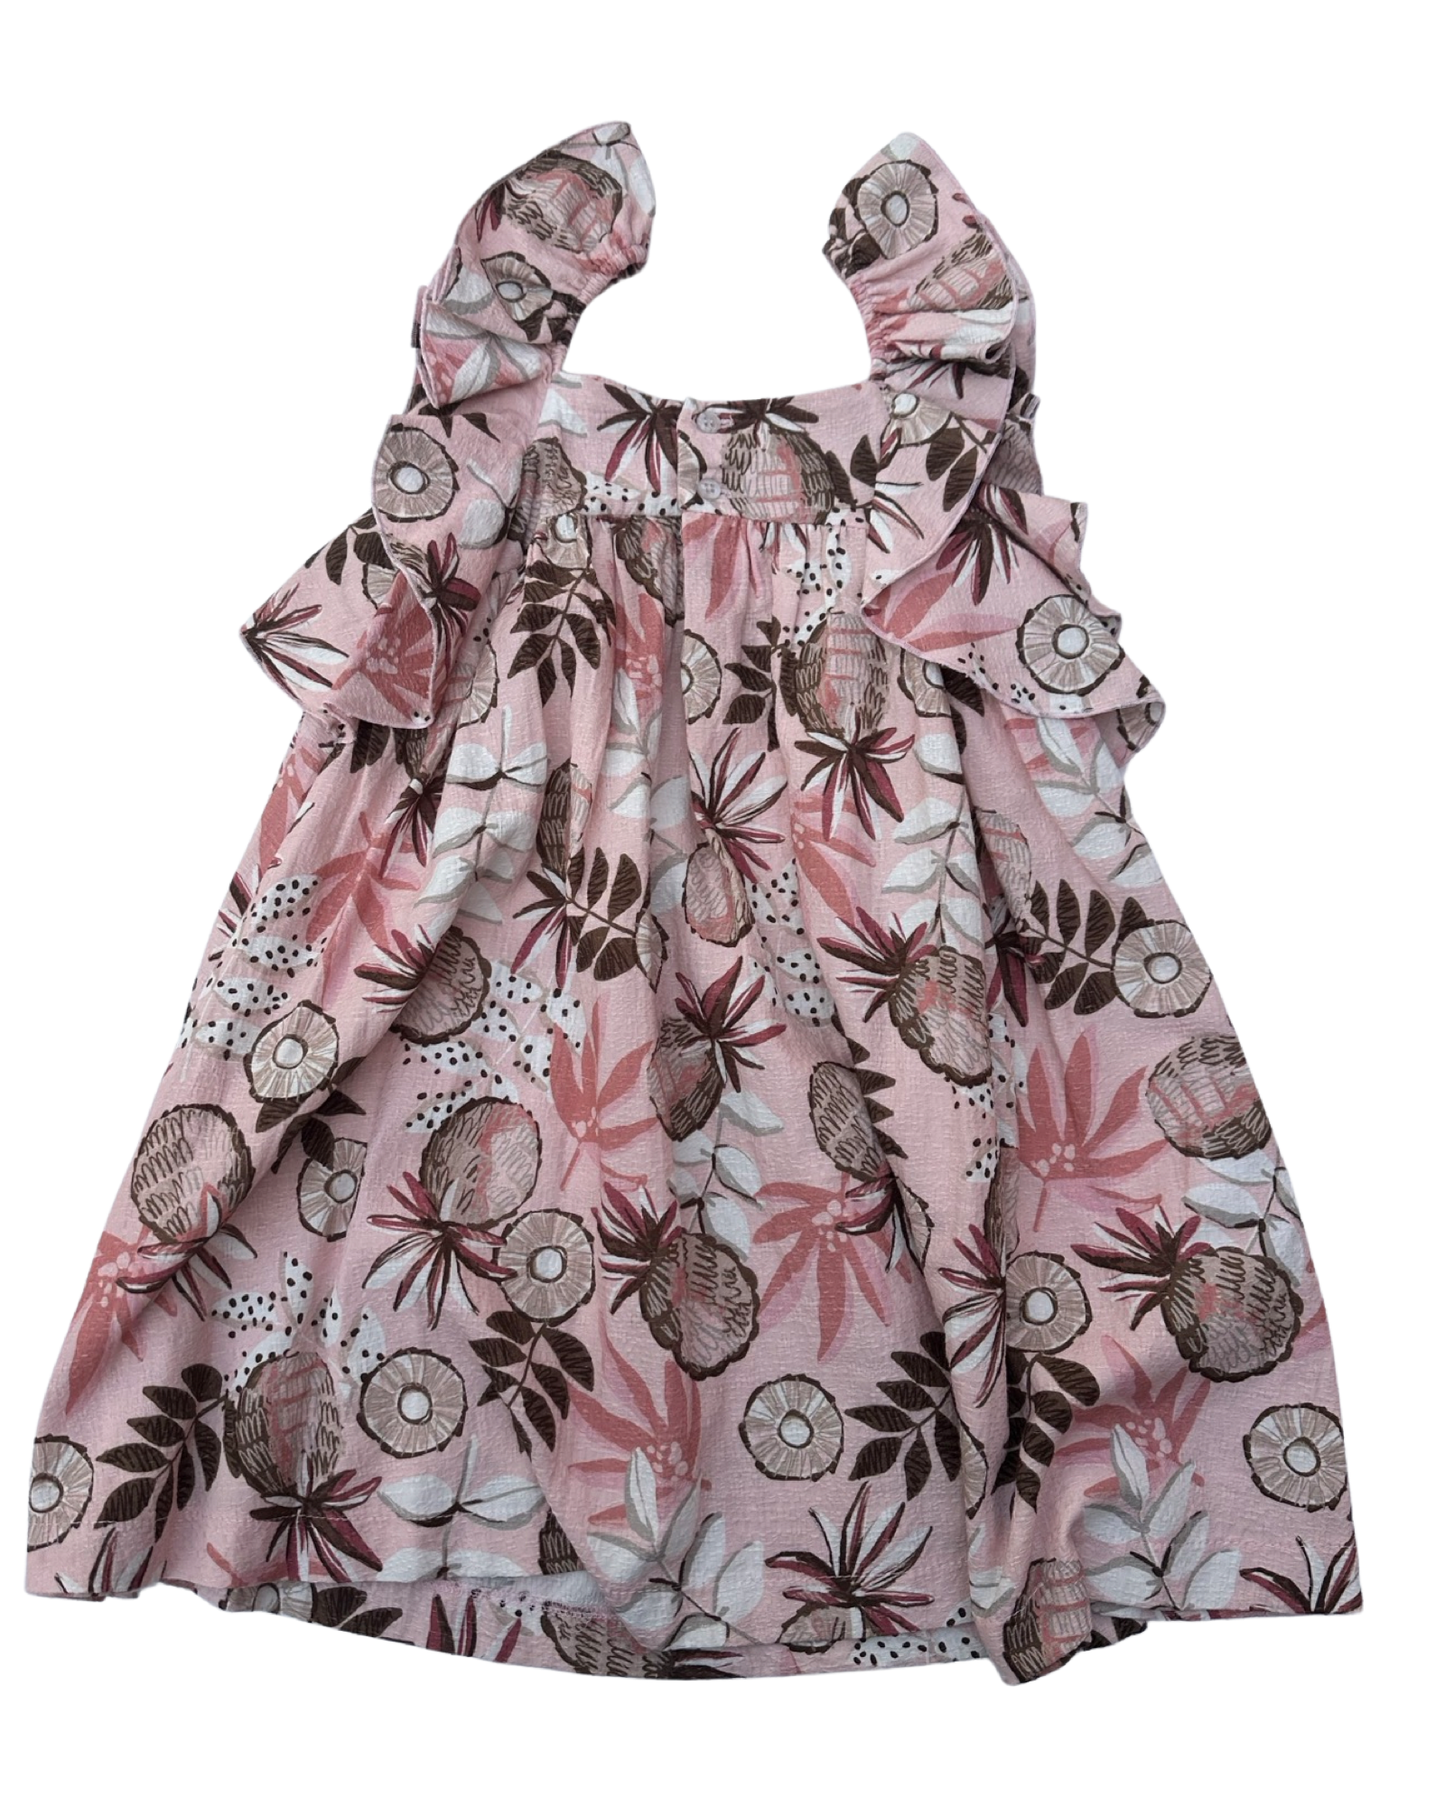 Mayoral printed dress in antique pink (size 5-6yrs)